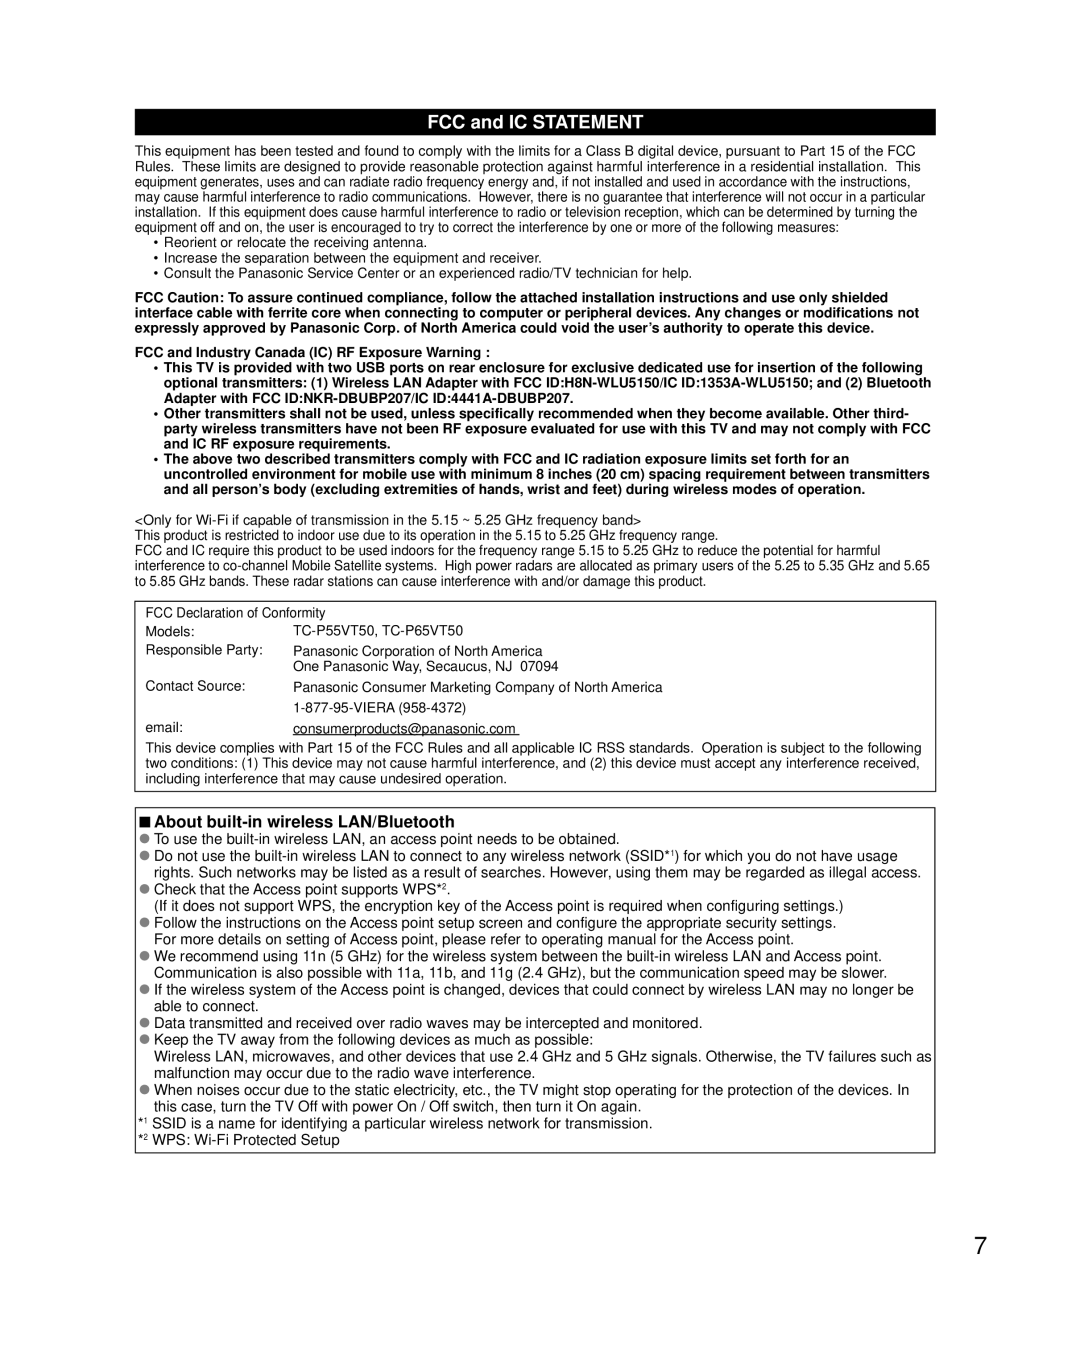 Panasonic TC-P65VT50, TC-P55VT50 owner manual FCC and IC STATEMENT, About built-in wireless LAN/Bluetooth 